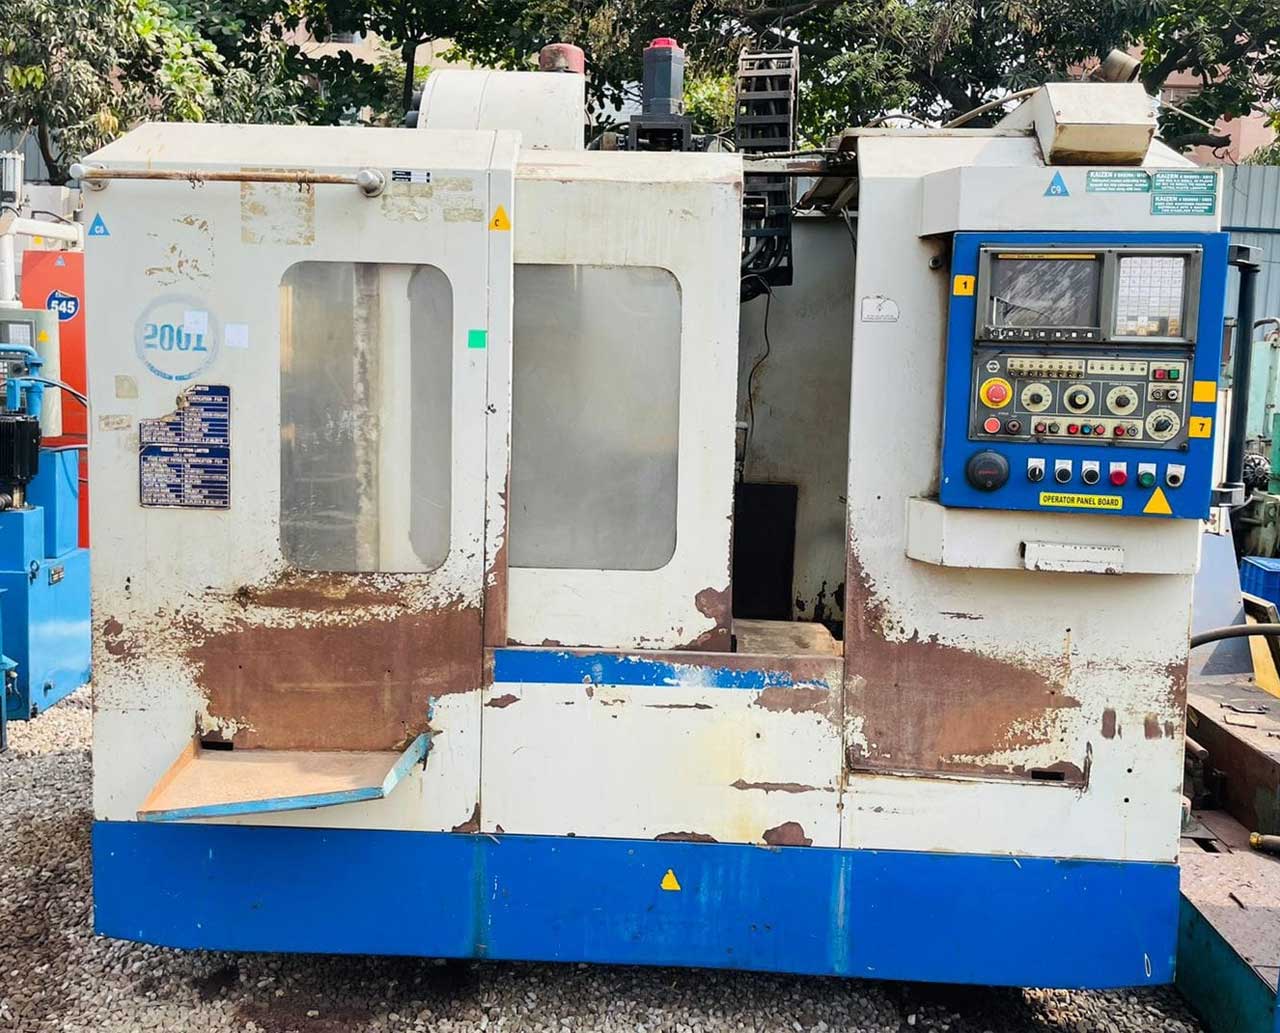 Used VMC Machine Spare Part Suppliers and Dealers in Pune, Old, Second Hand and Refurbished Vertical Machining Centers Spare Parts in Pune | Puja Enterprises